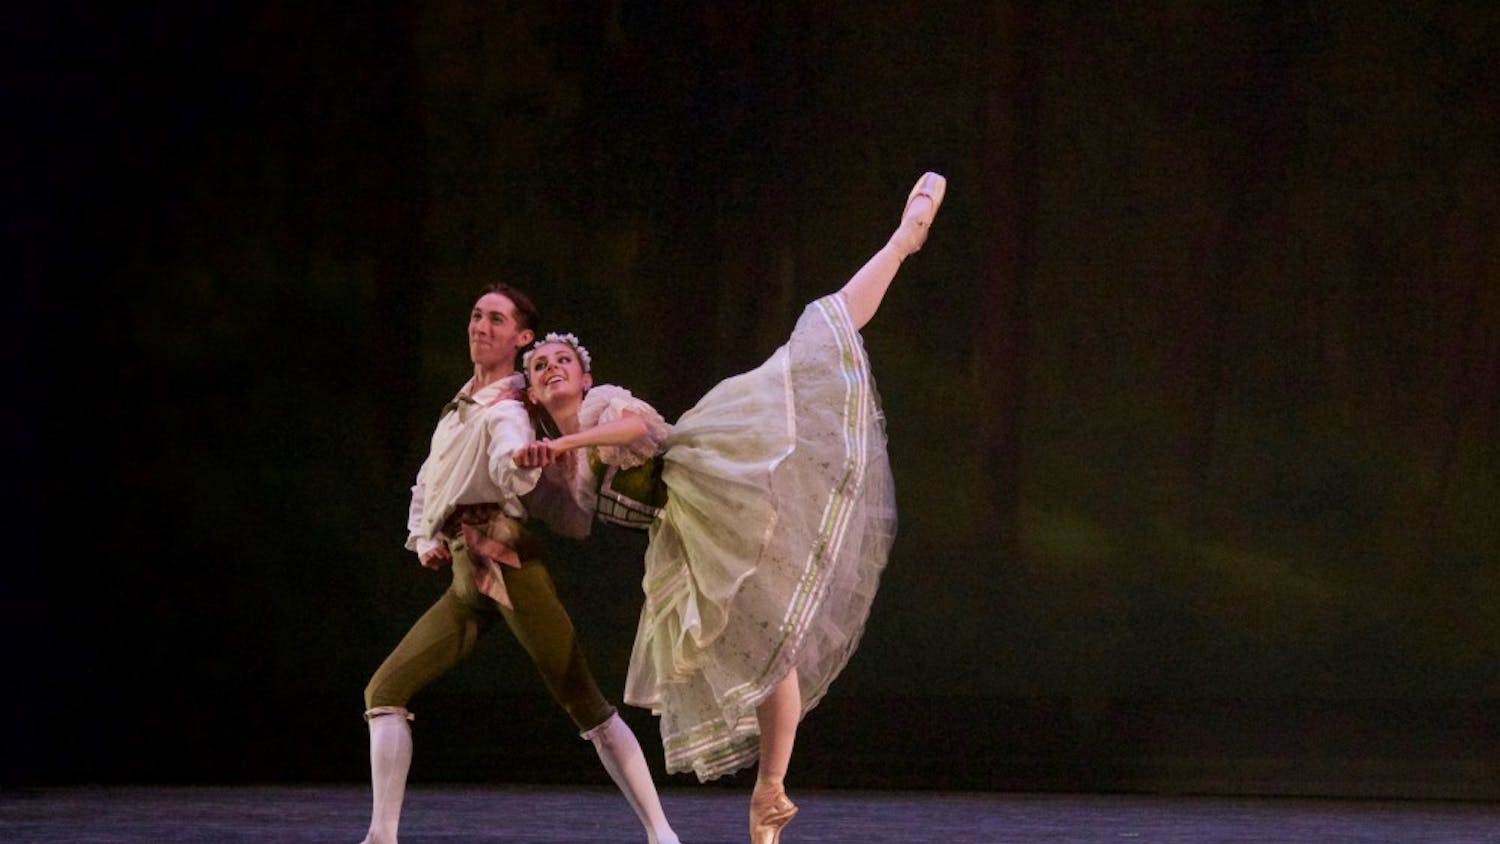 Nicholas Gray and Georgia Dalton dance in "Dances for Two." &nbsp;The ballet will play at the Musical Arts Center on Sept. 29 at 7:30 p.m. and Sept. 30 at 2 p.m. and 7:30 p.m.&nbsp;